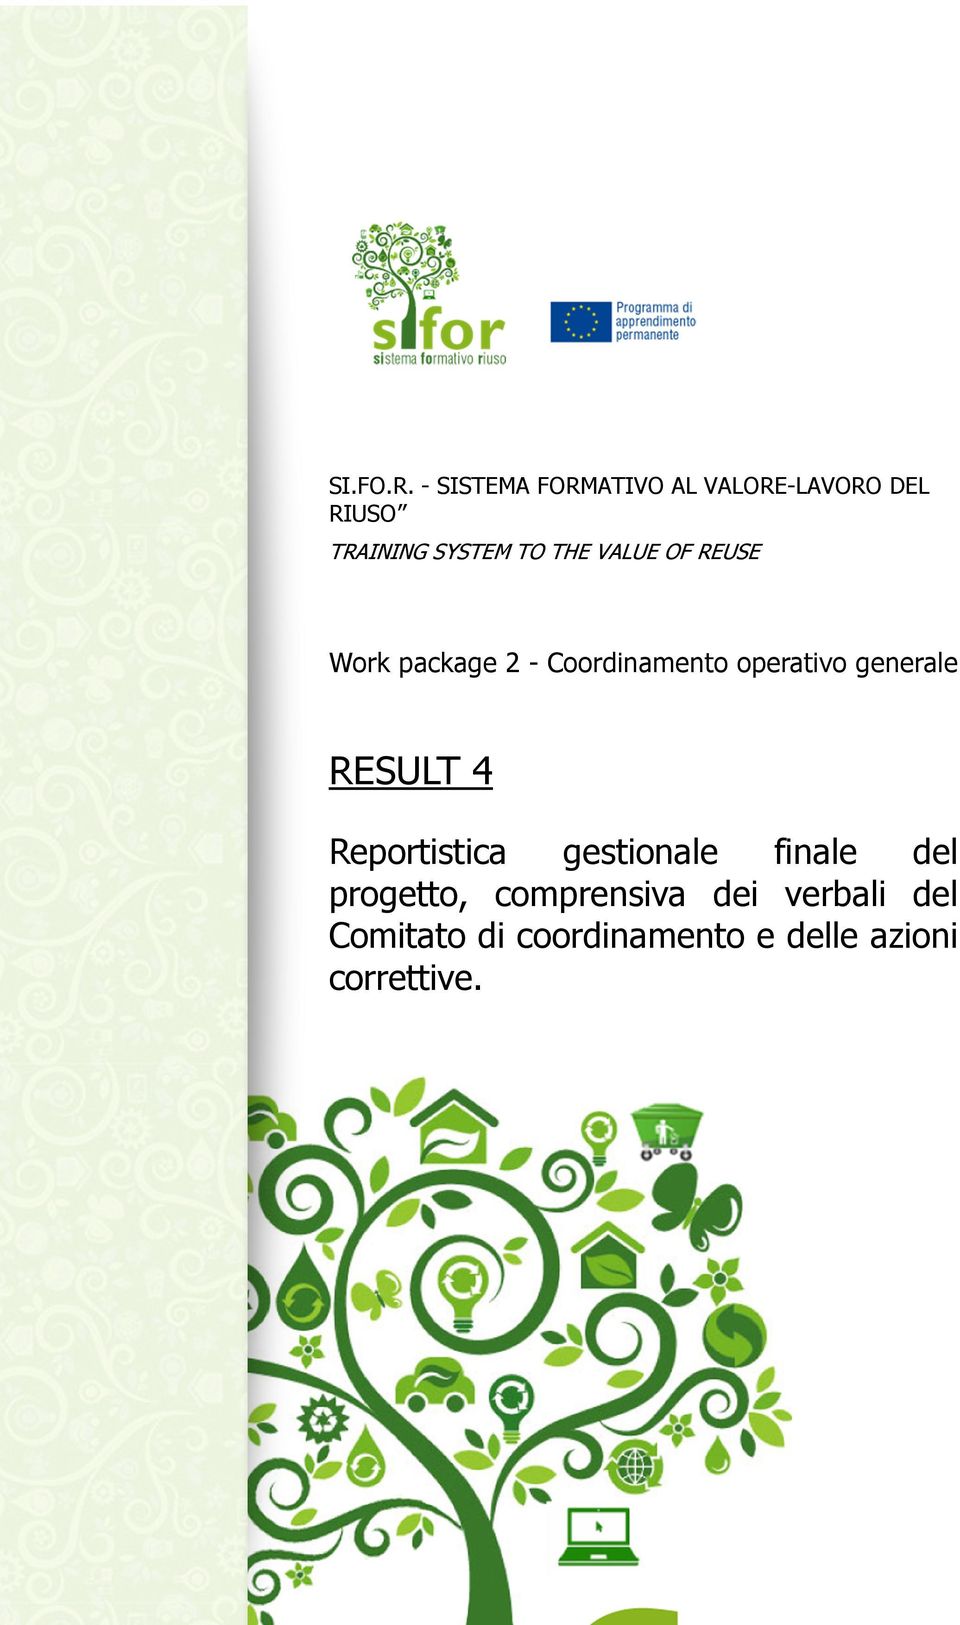 VALUE OF REUSE Work package 2 - Coordinamento operativo generale